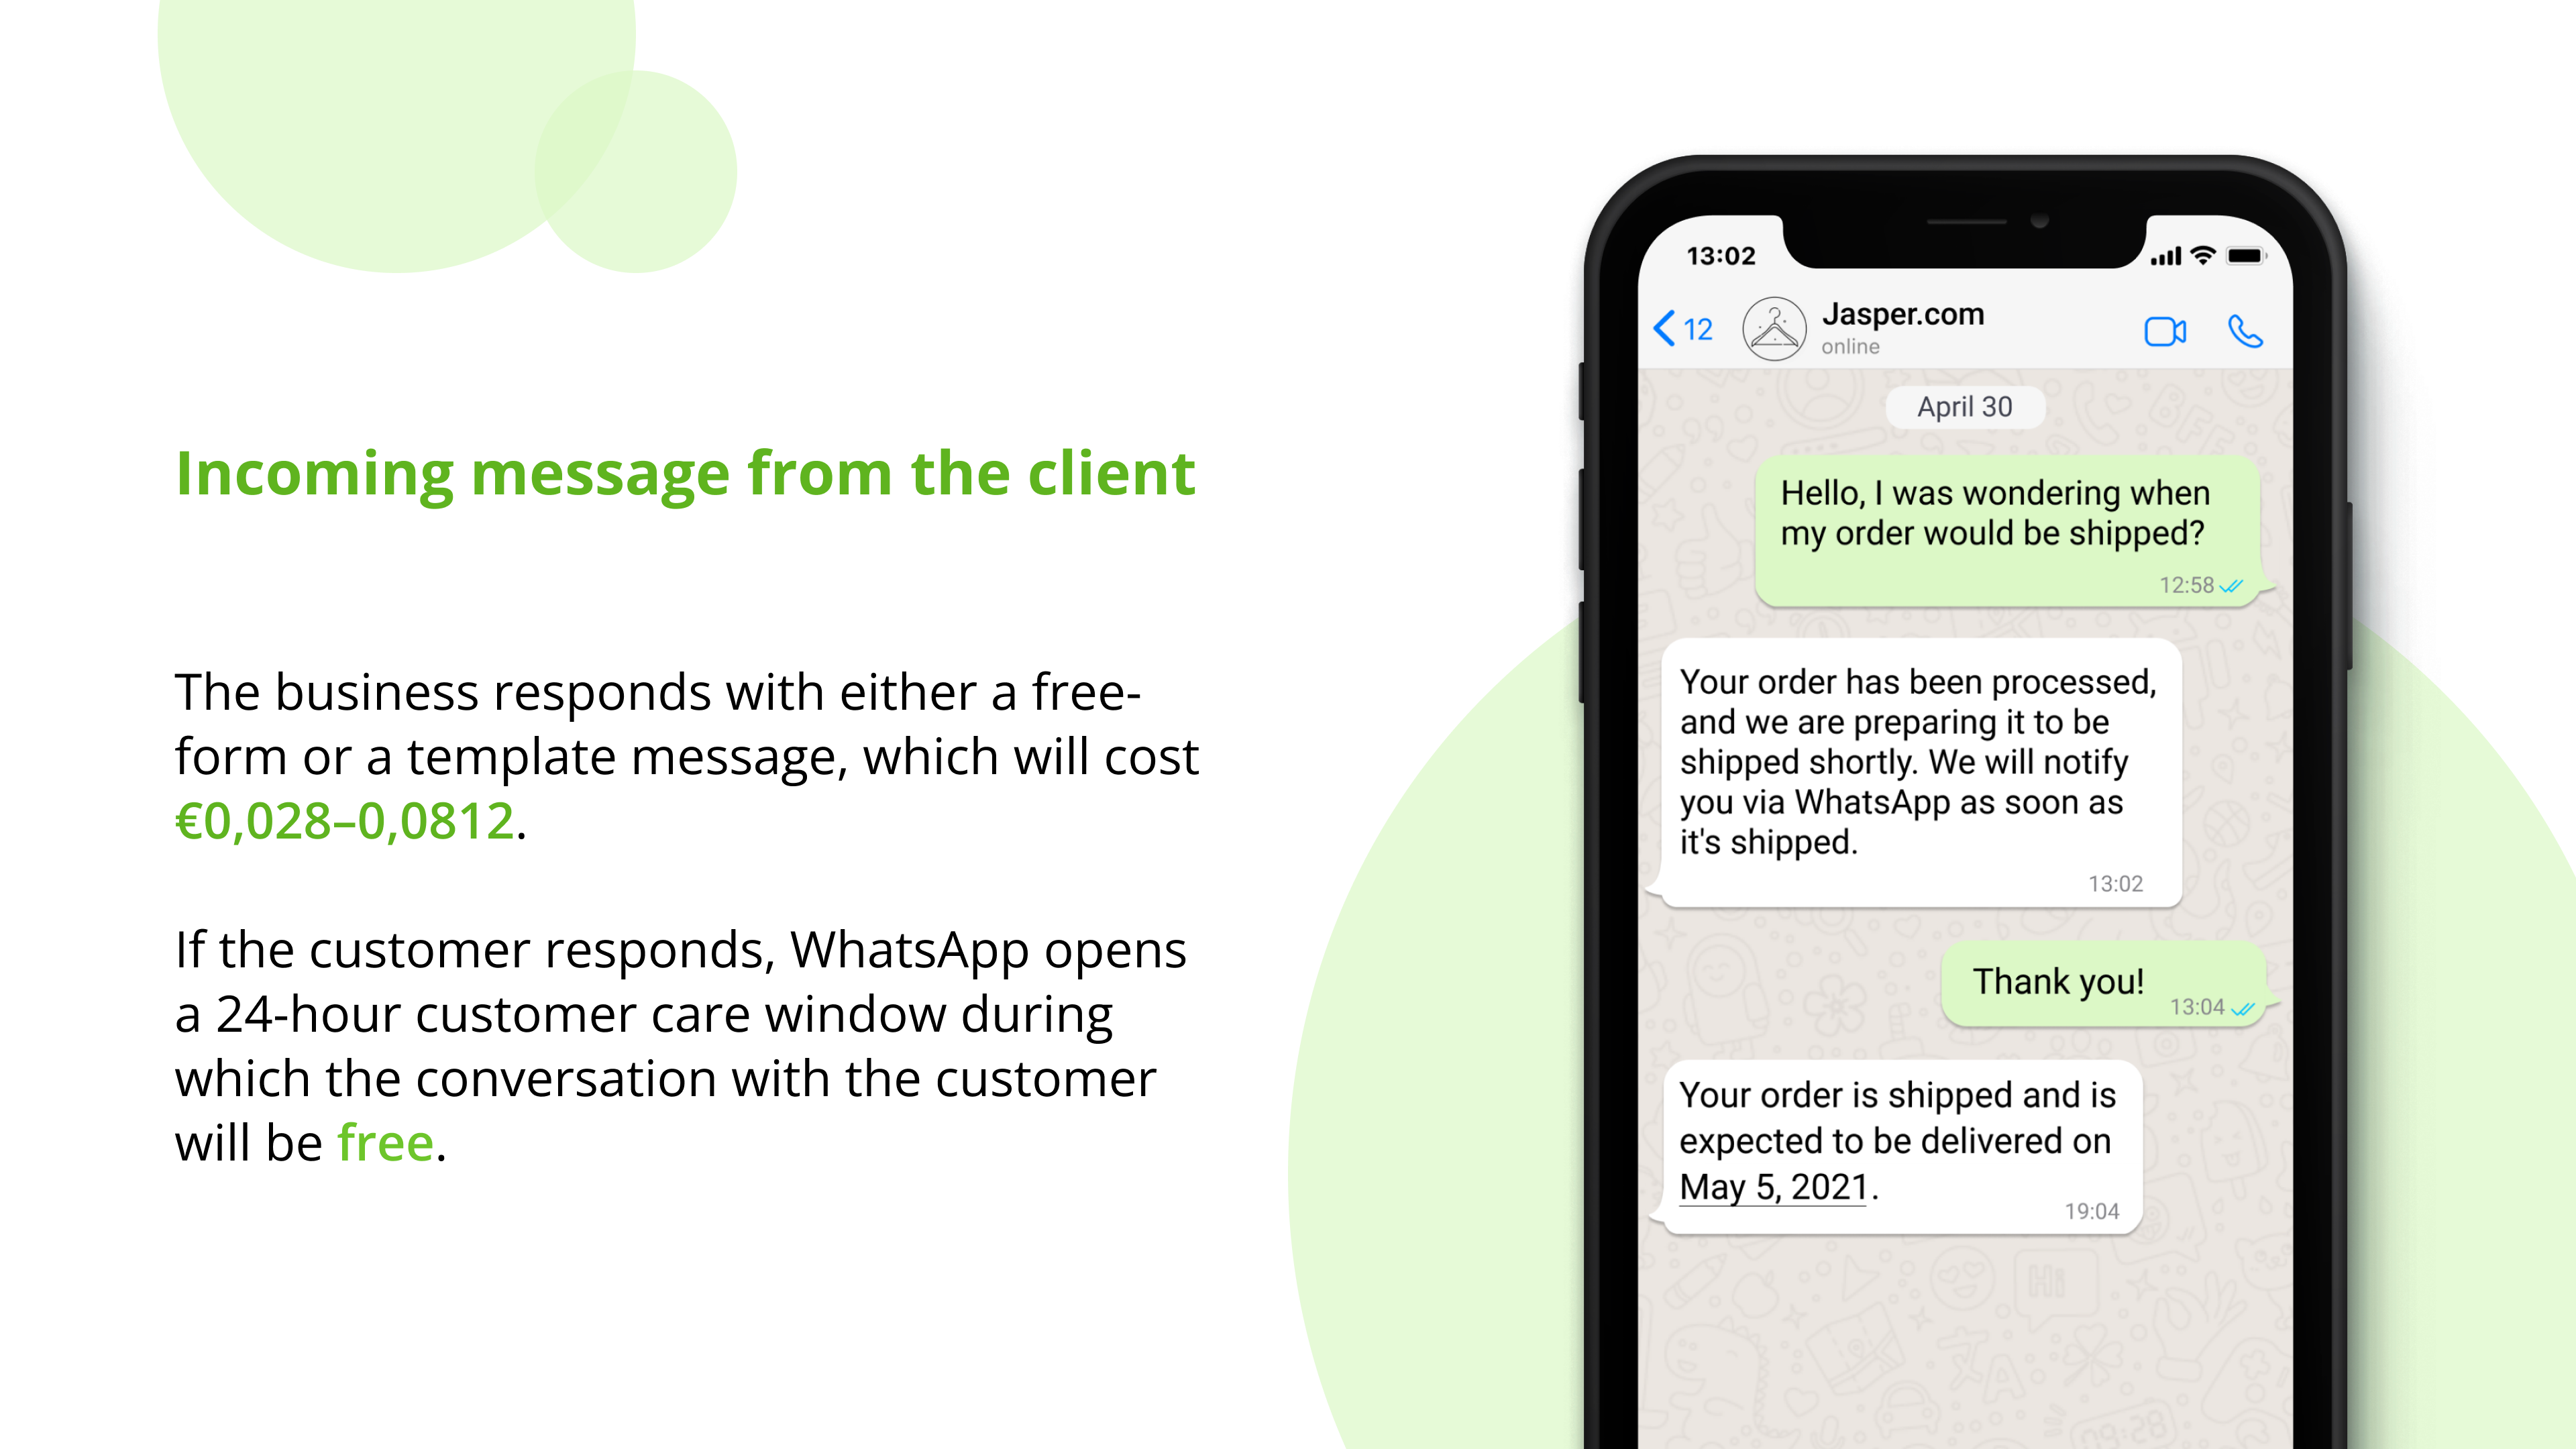 WhatsApp session: Incoming message from the client